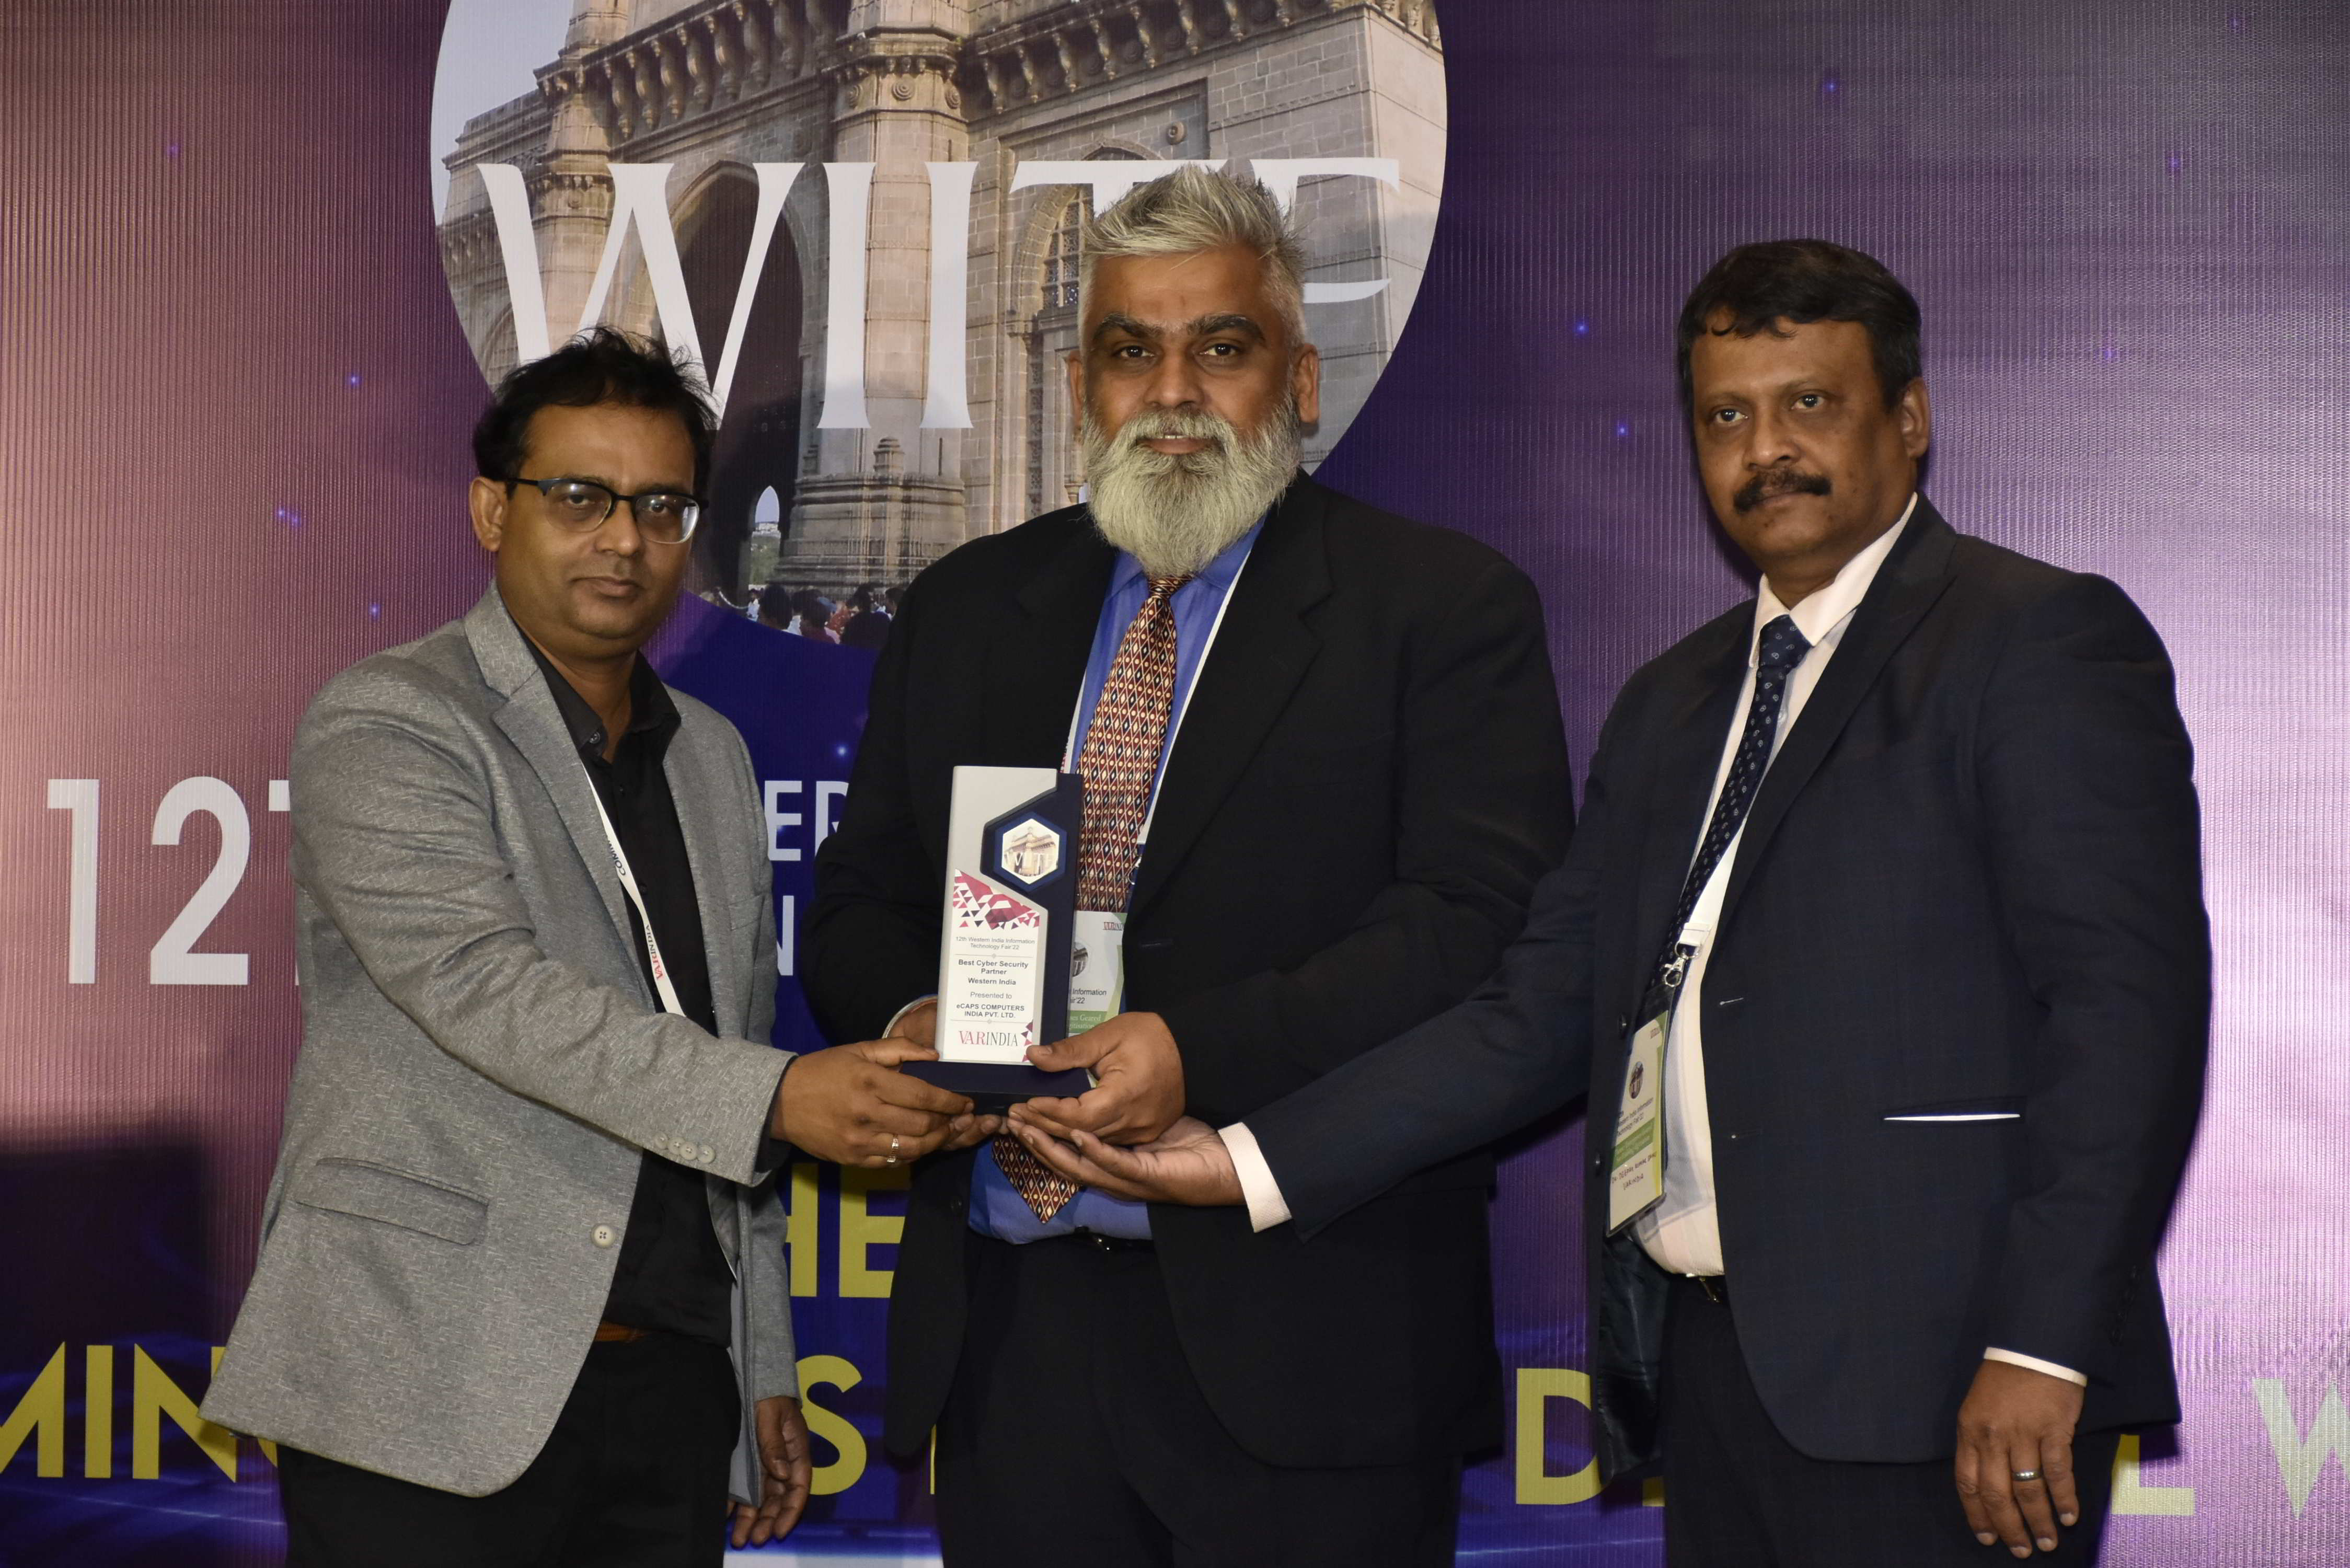 The Best Cyber Security Partner, Western India- went to eCaps Computers India Pvt. Ltd.